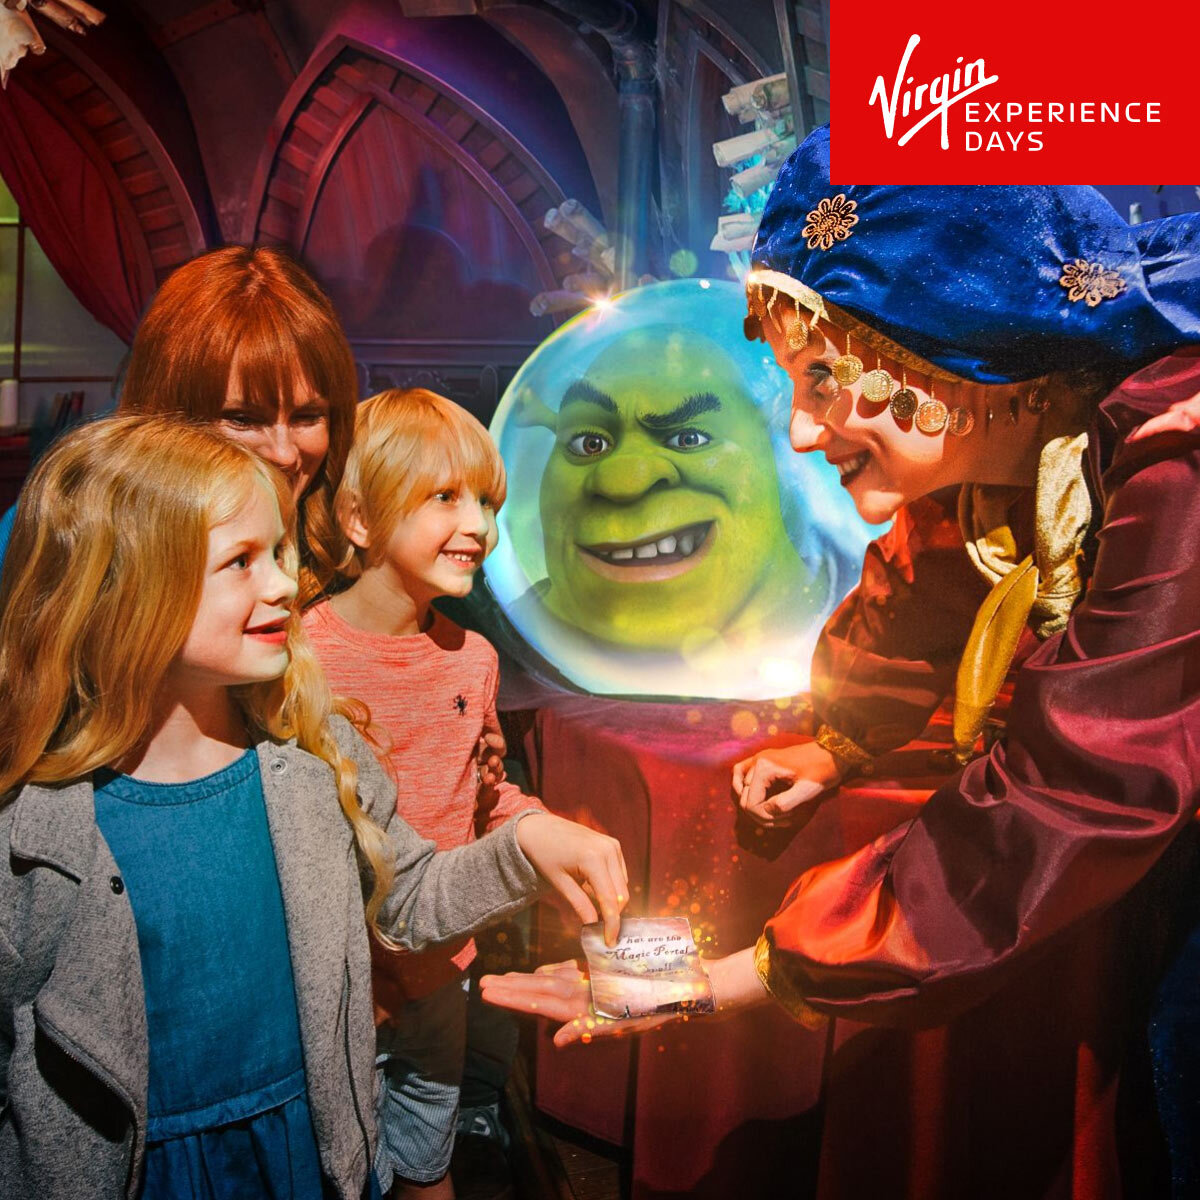 Buy Virgin Experience Days Shrek Adventure and Two Course Lunch with Mocktail